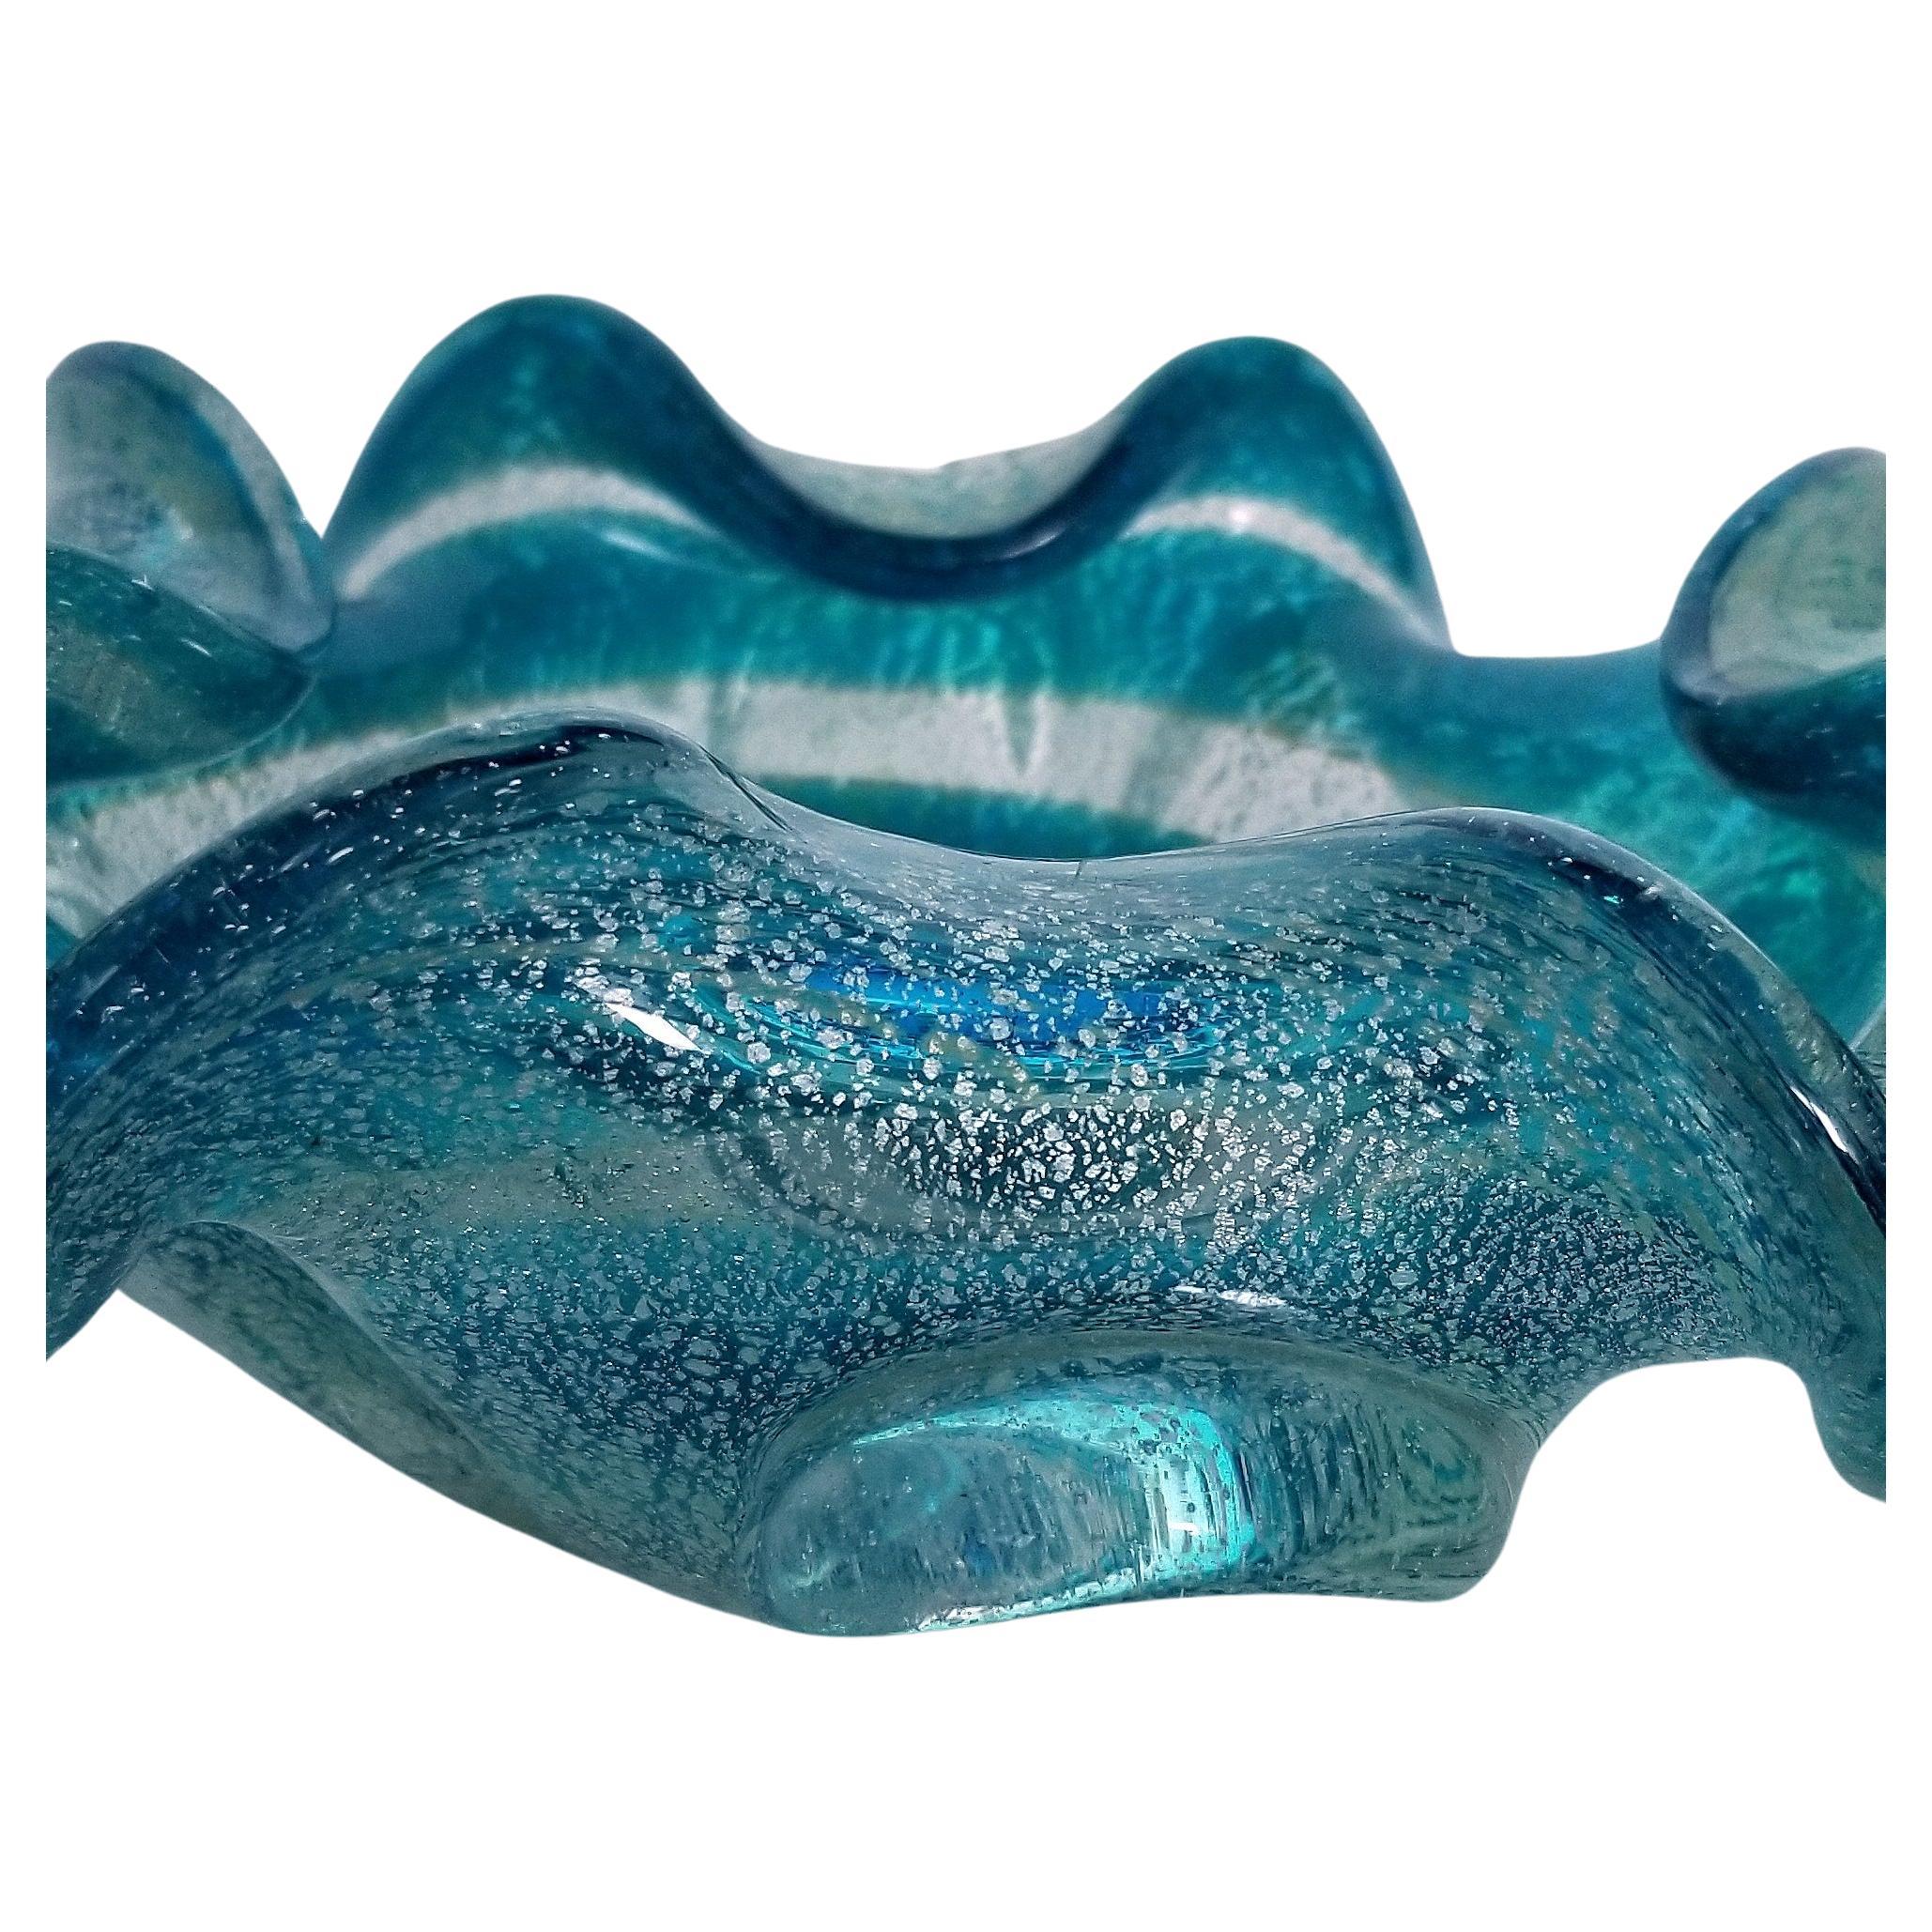 Art Glass Blue and Silver Murano Glass Ashtray or Catch-all Bowl For Sale